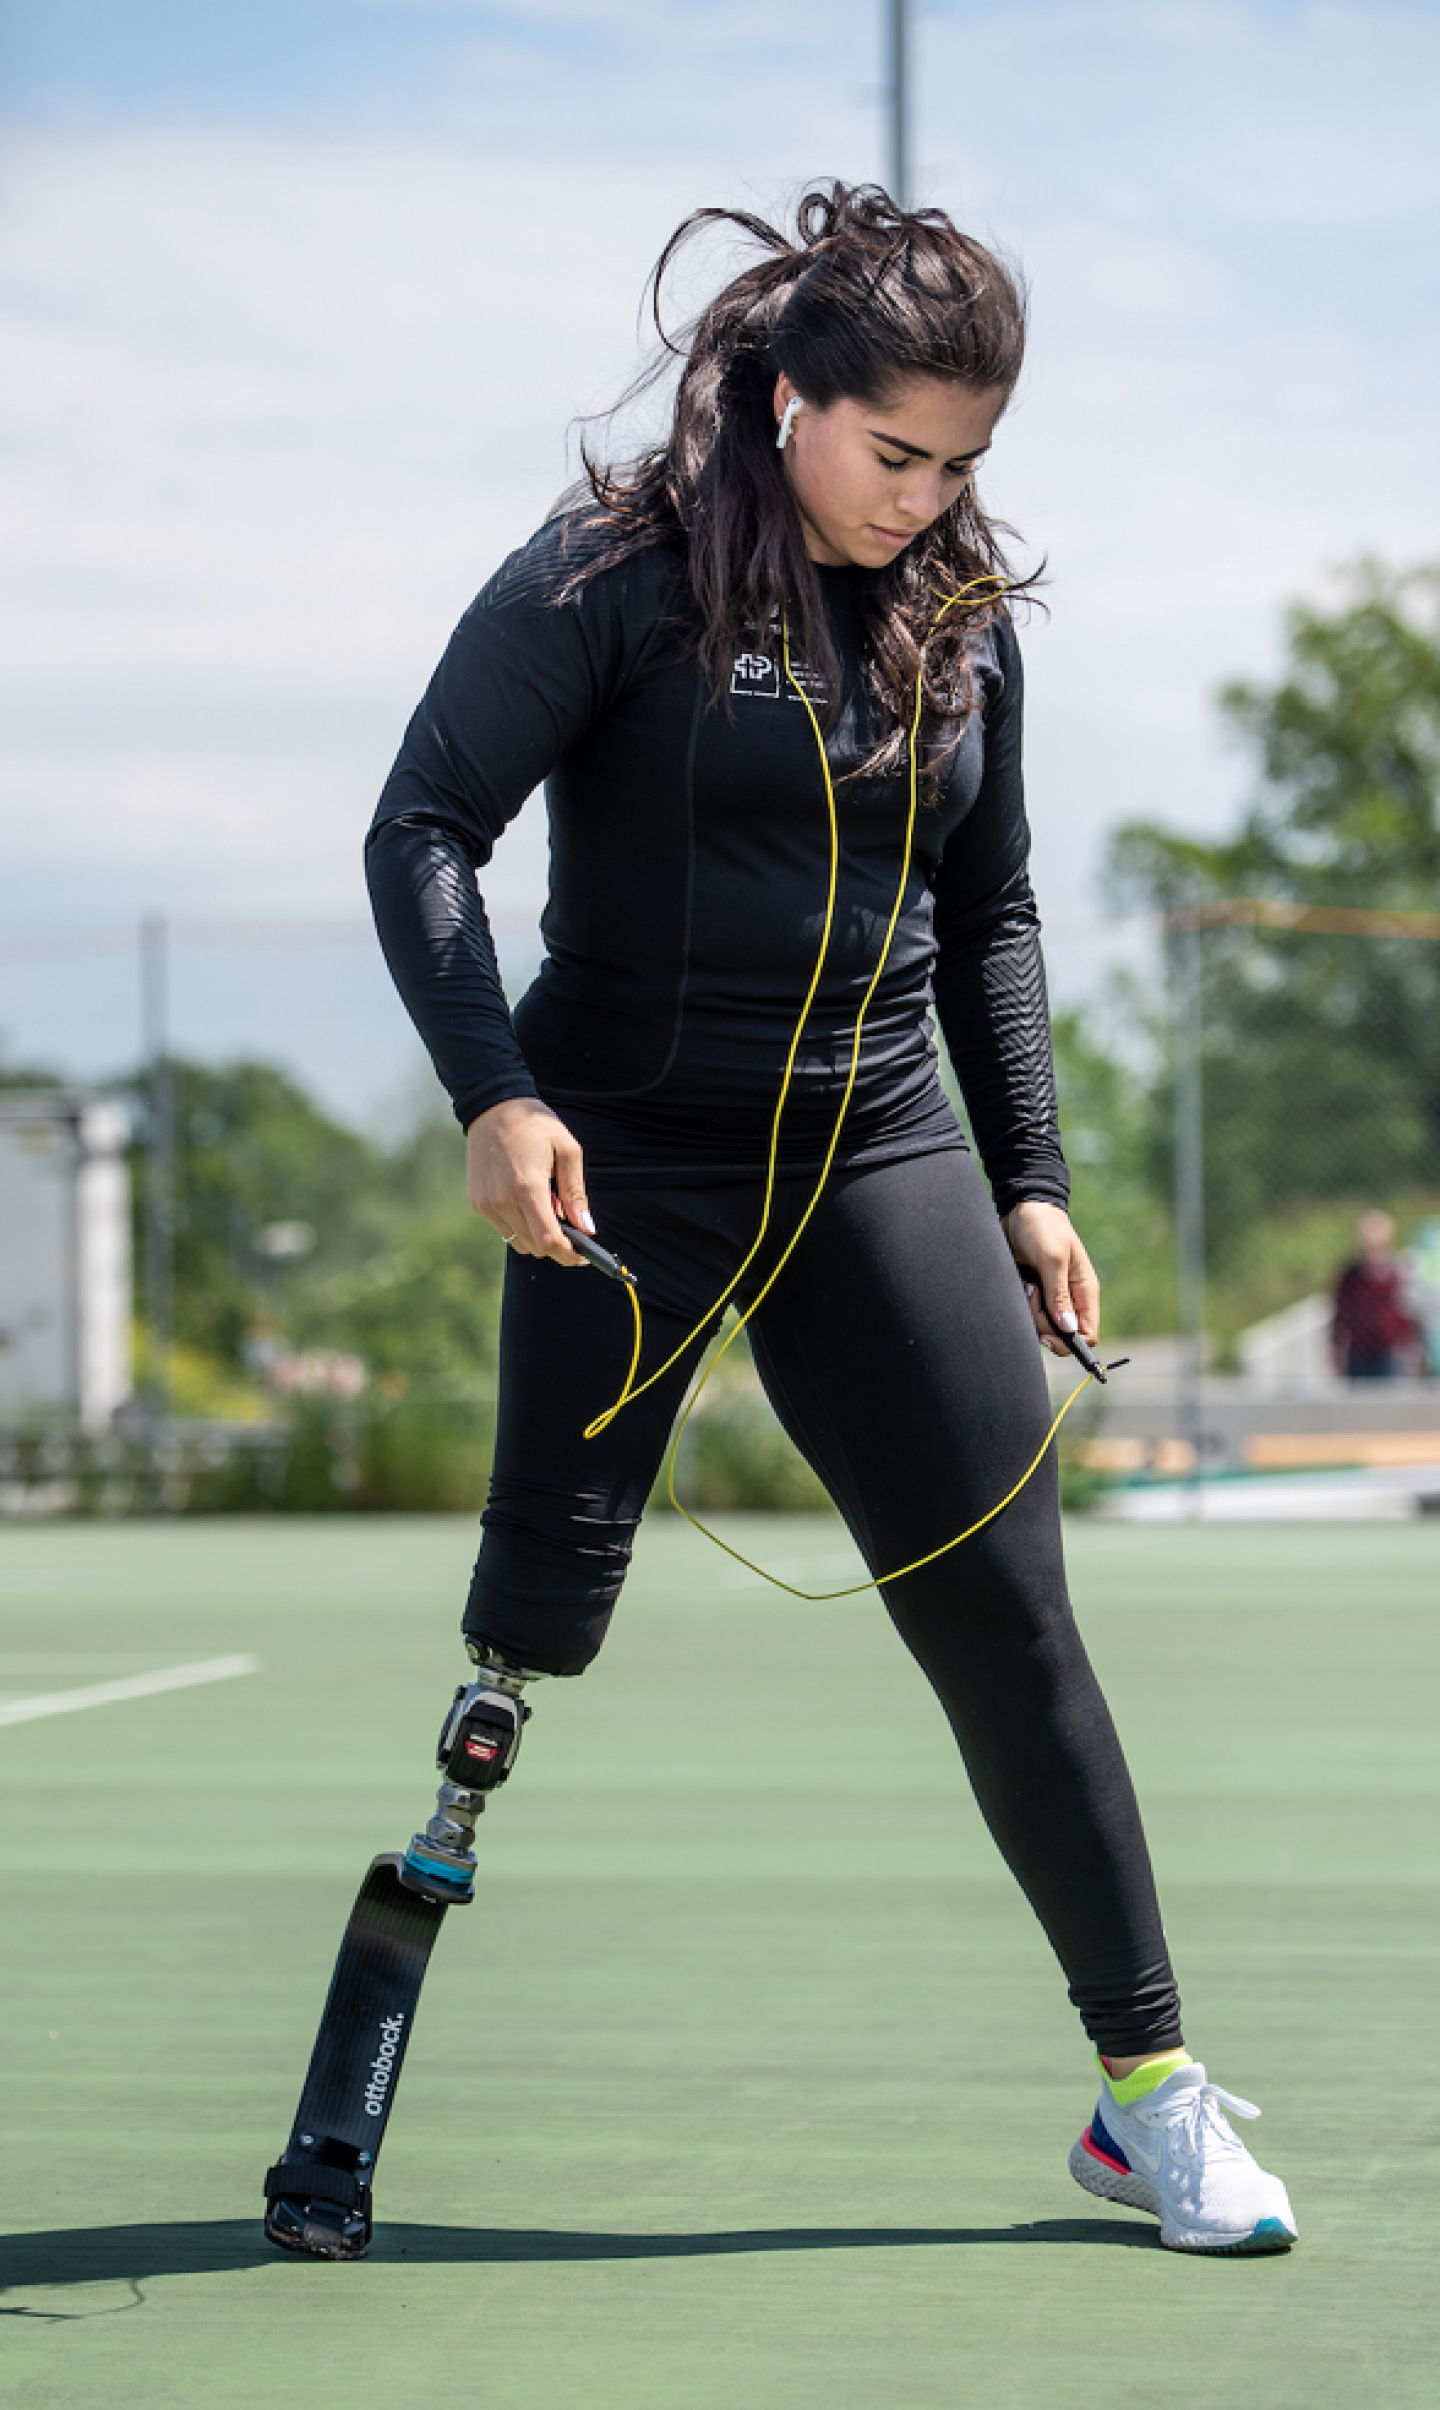 Paralympic sprinter and long-jumper Sofia Gonzalez, warming up.